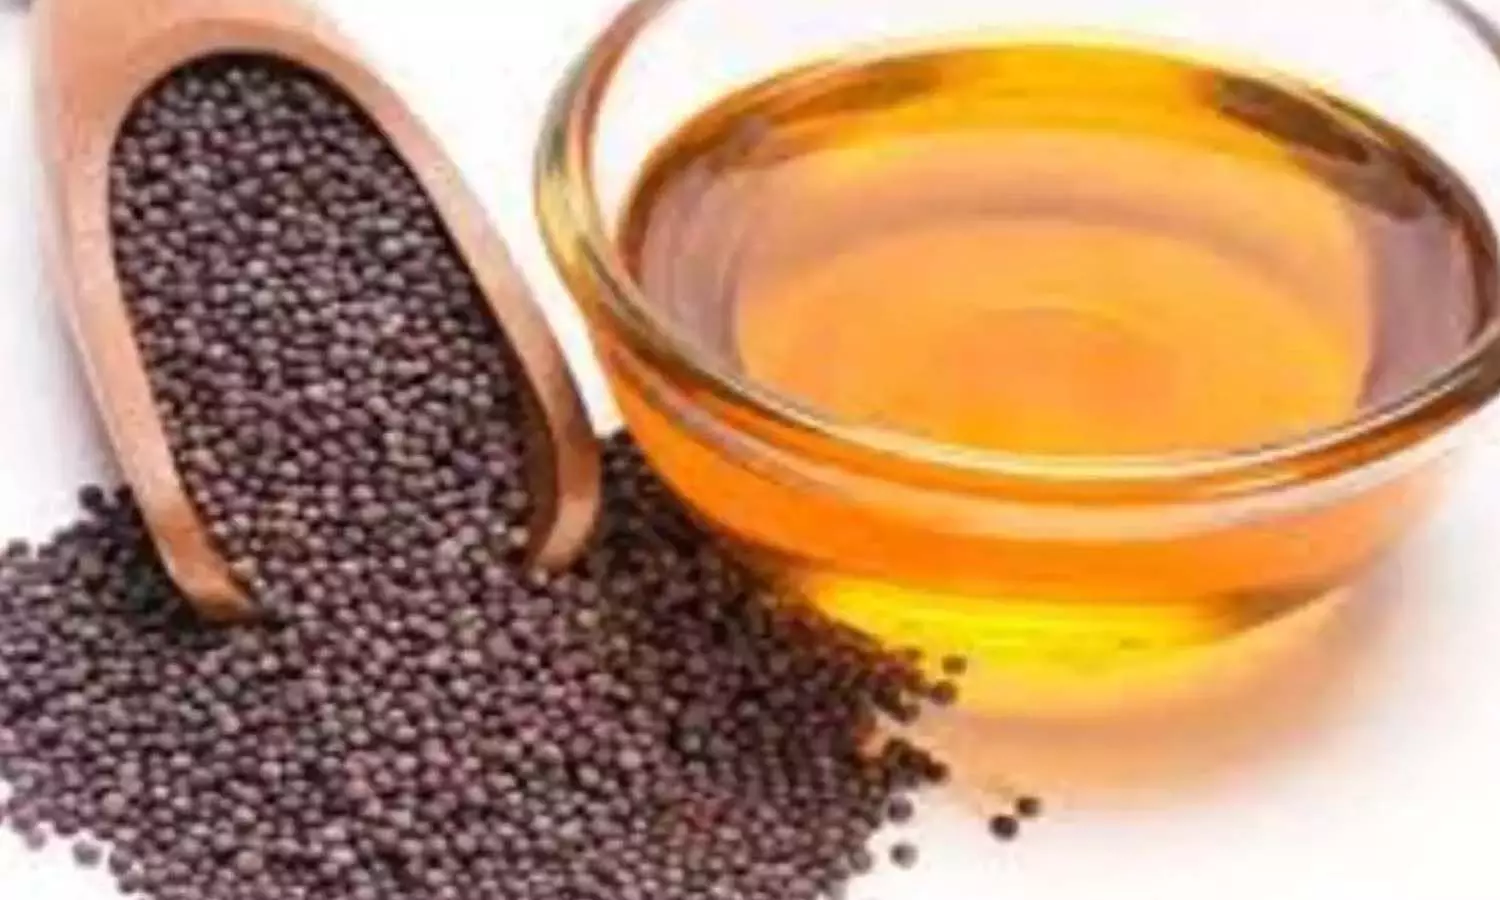 Mustard oil is banned in America, Canada and Europe